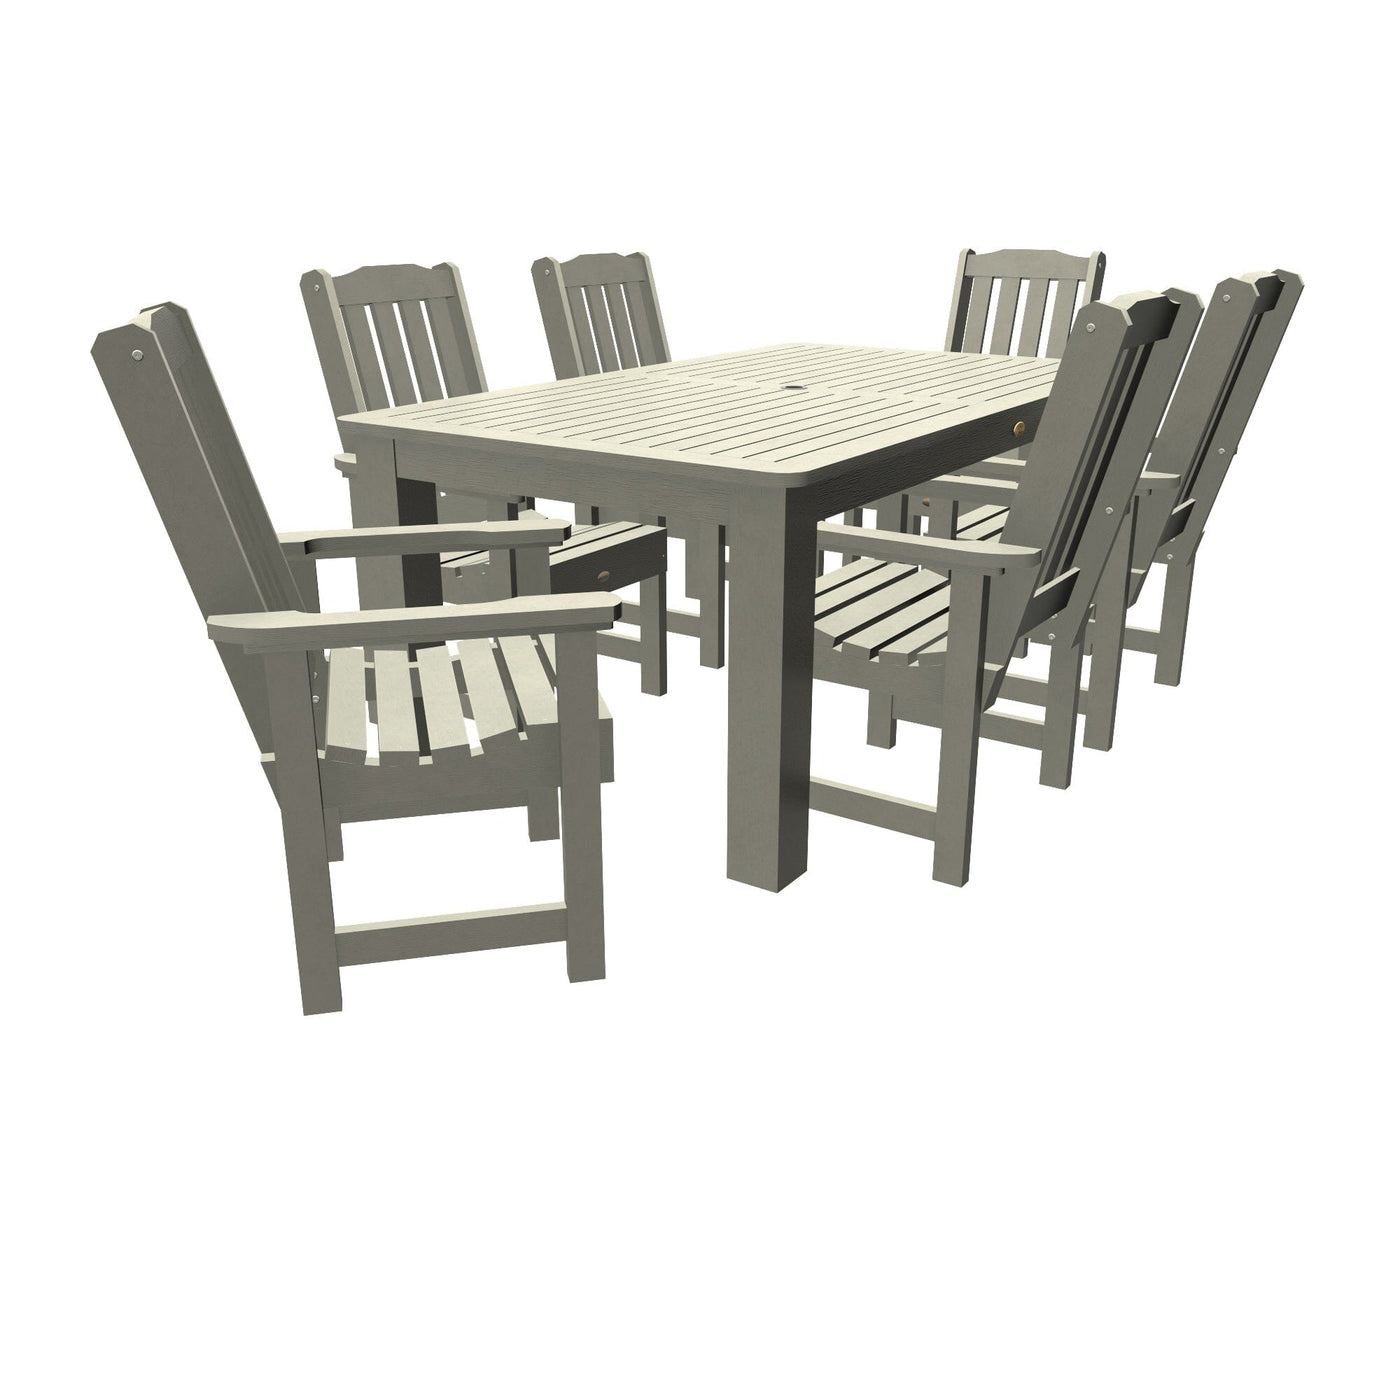 Lehigh 7pc Rectangular Outdoor Dining Set 42in x 72in - Dining Height Dining Highwood USA Harbor Gray 